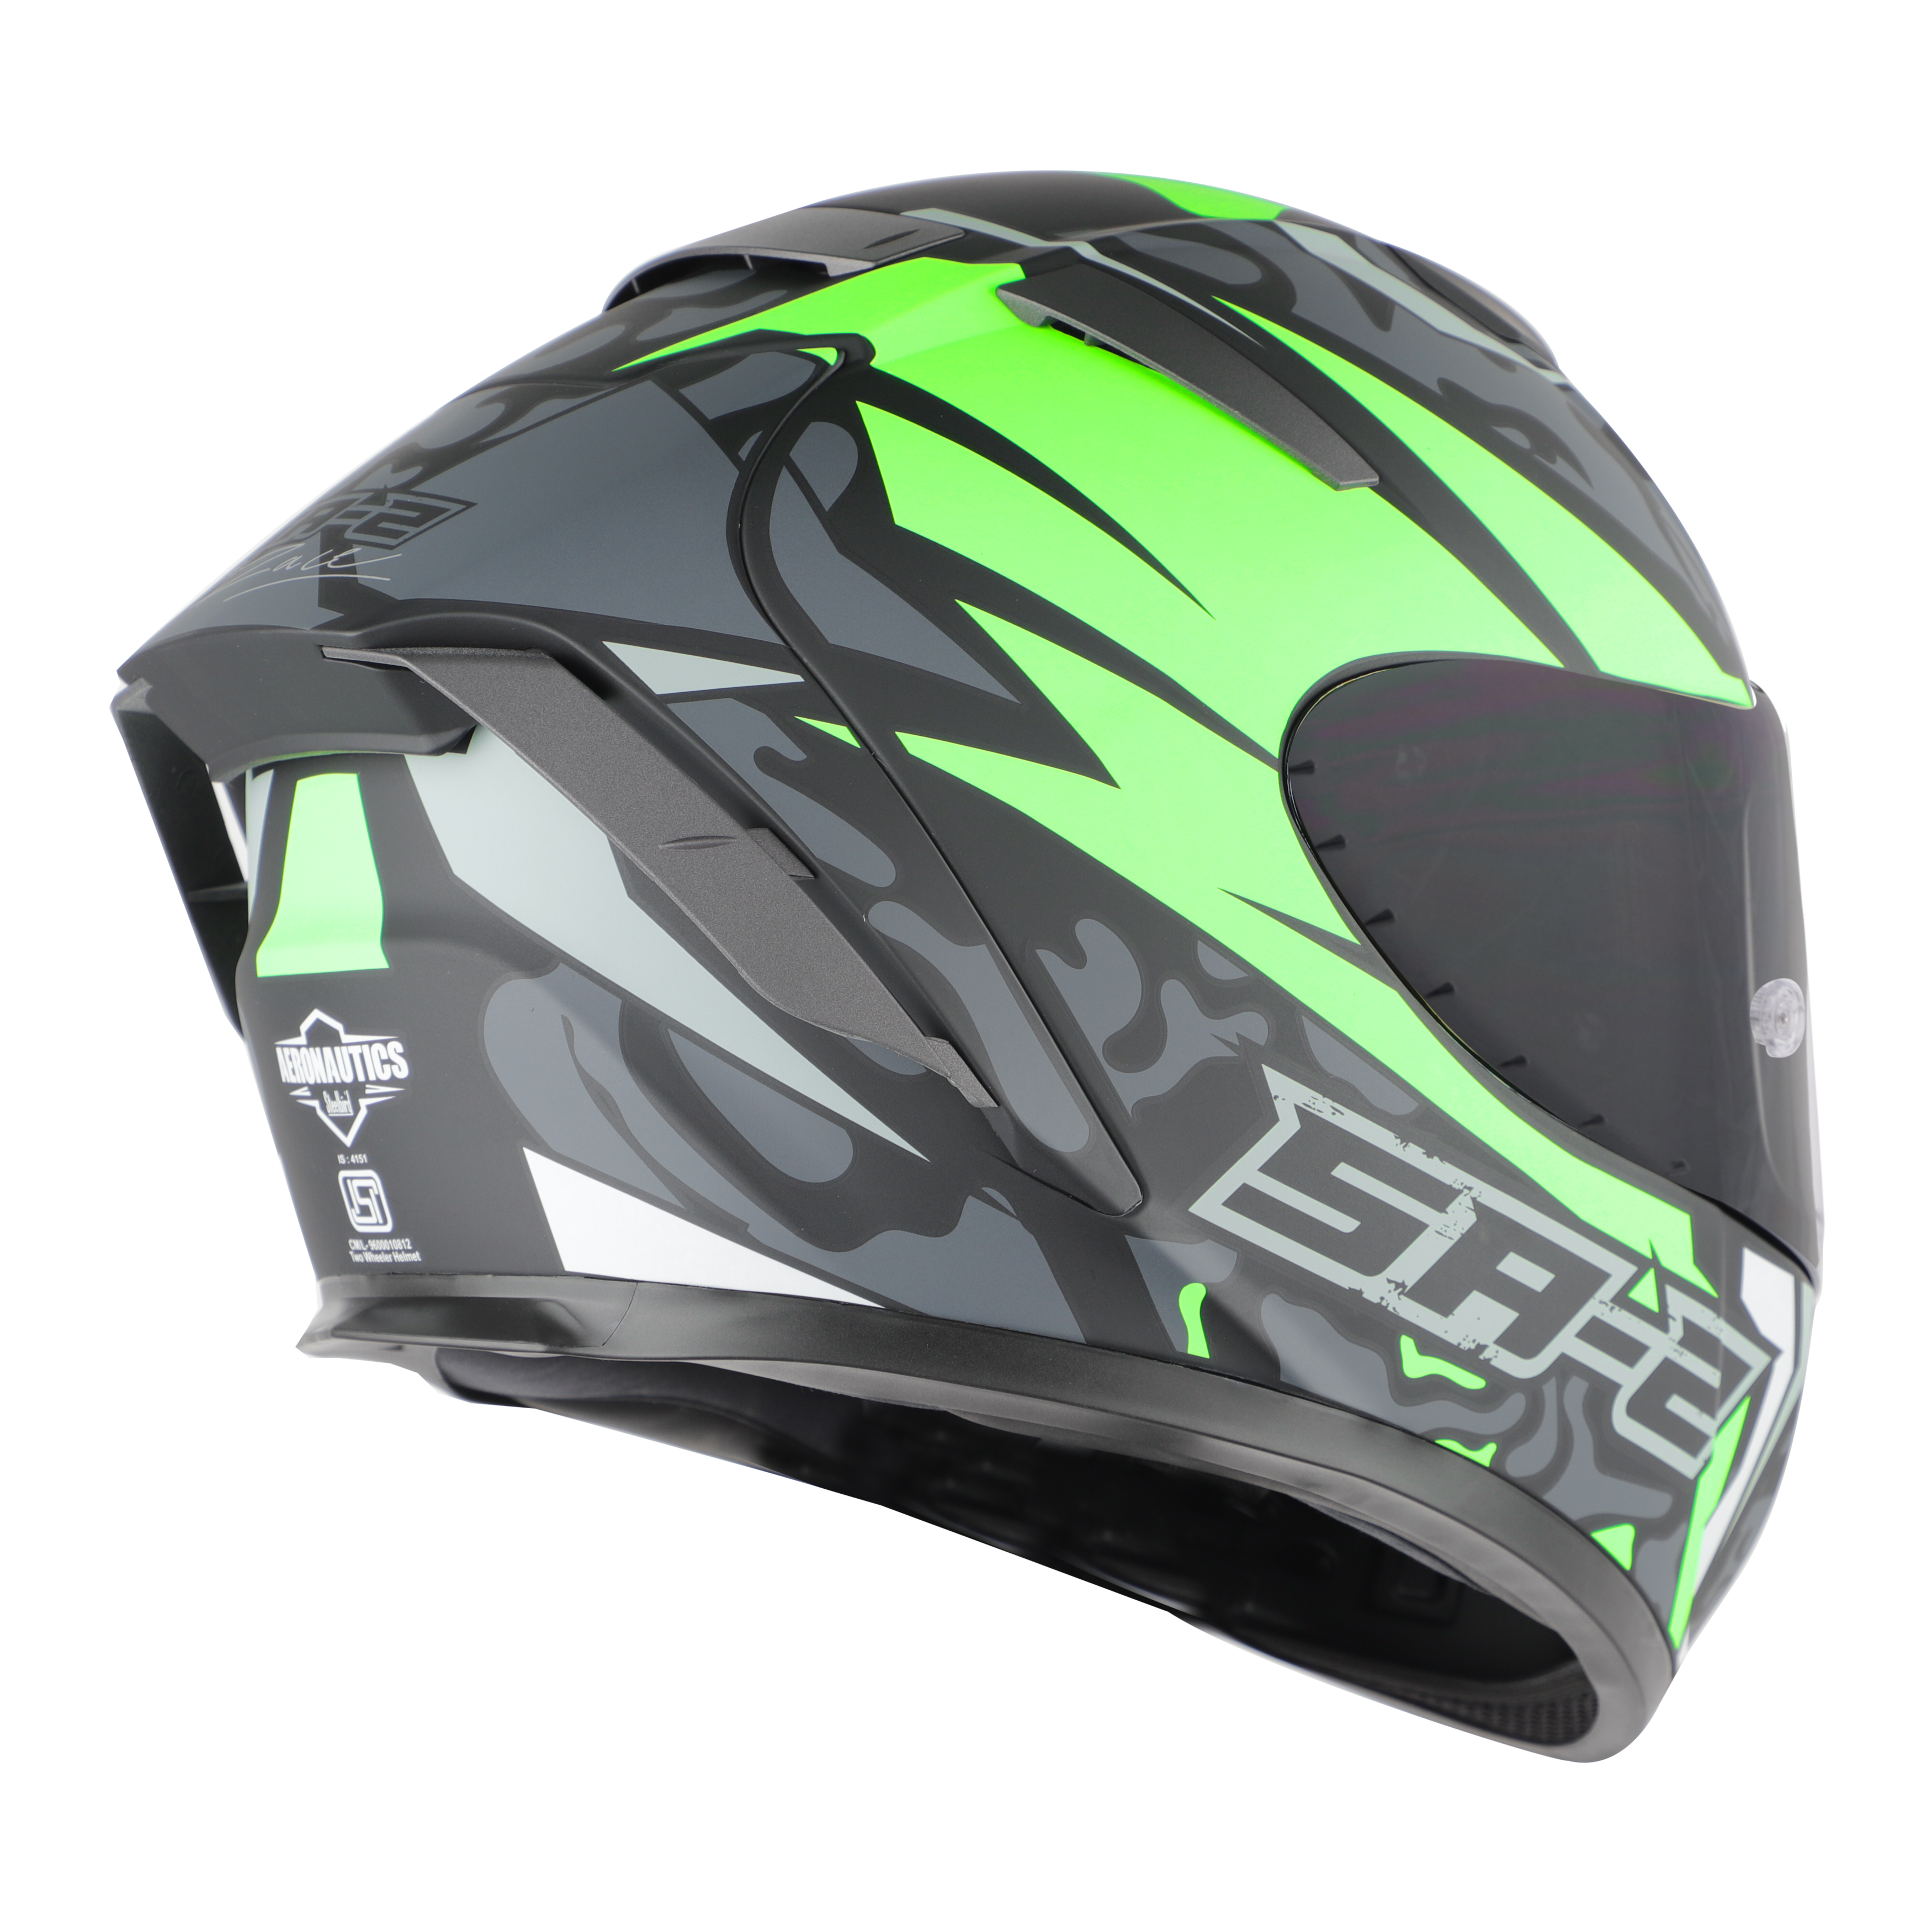 SA-2 TERMINATOR 3.0 GLOSSY BLACK WITH GREEN FITTED WITH CLEAR VISOR EXTRA SMOKE VISOR FREE (WITH ANTI-FOR SHIELD HOLDER)